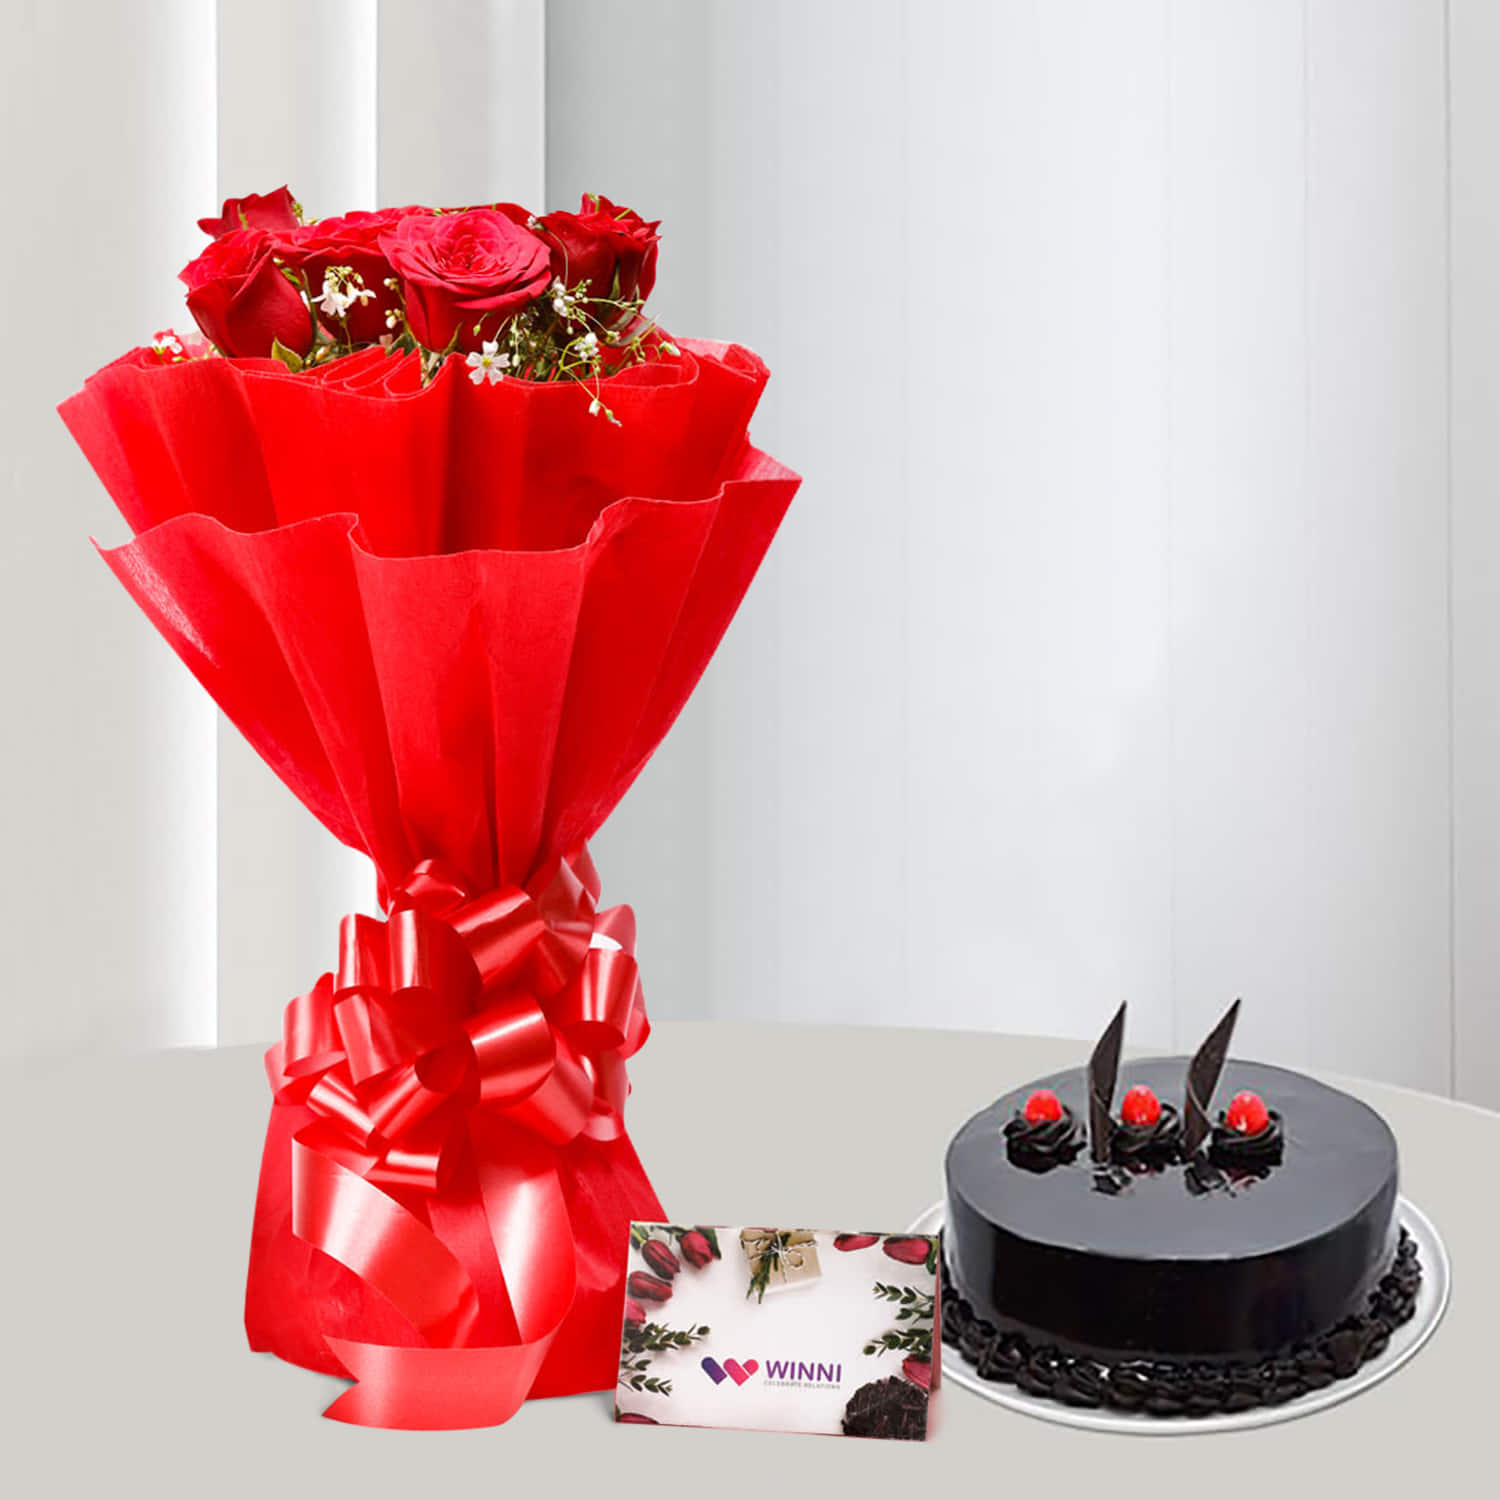 Send Christmas Plum Cake Online in India at Indiagift.in